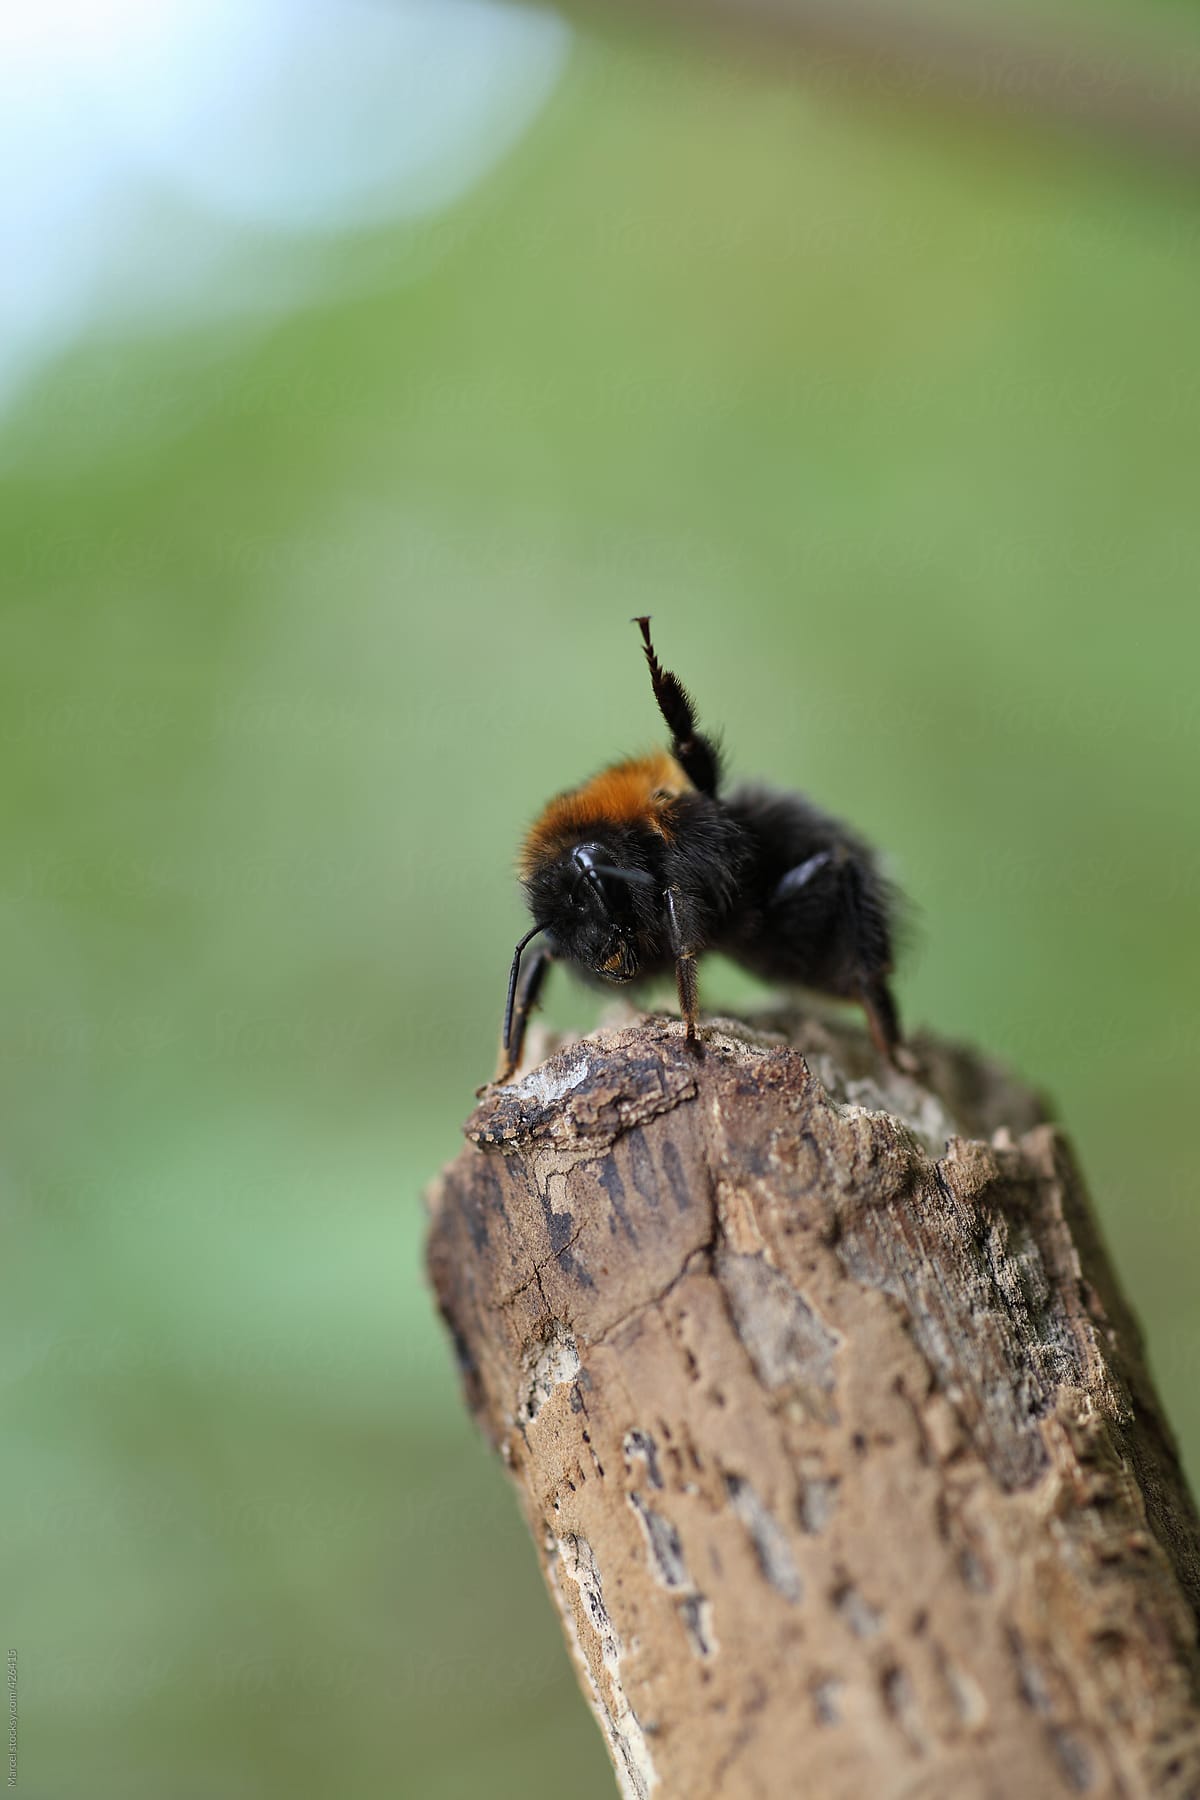 Bumblebee lifting up a leg in defense